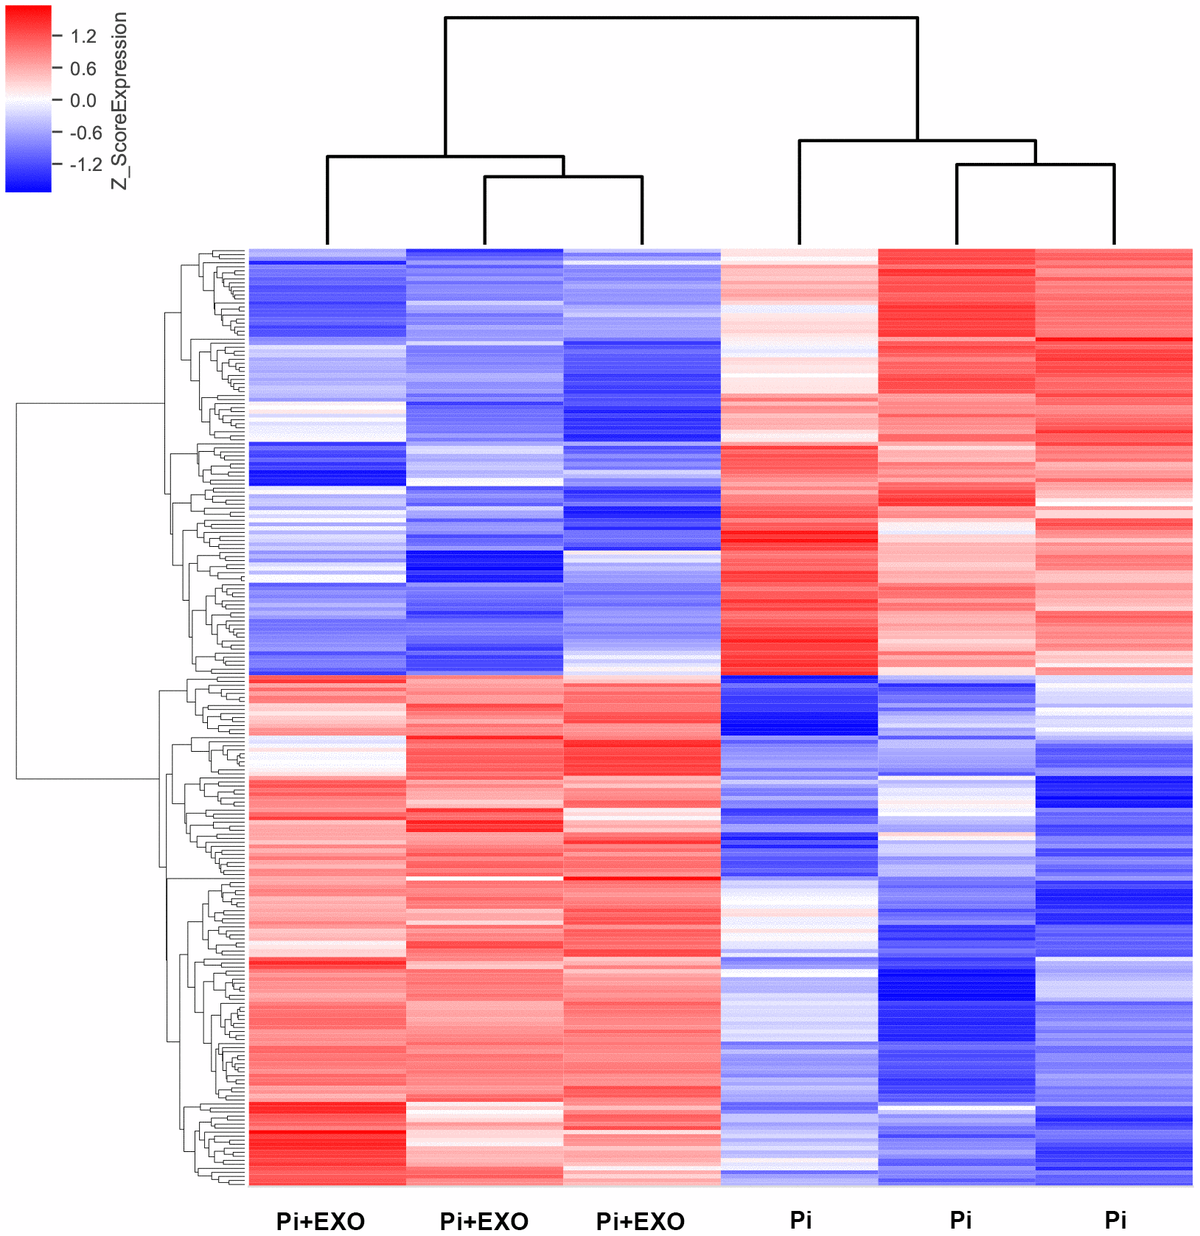 Hierarchical clustering analyses of differentially expressed lncRNAs.